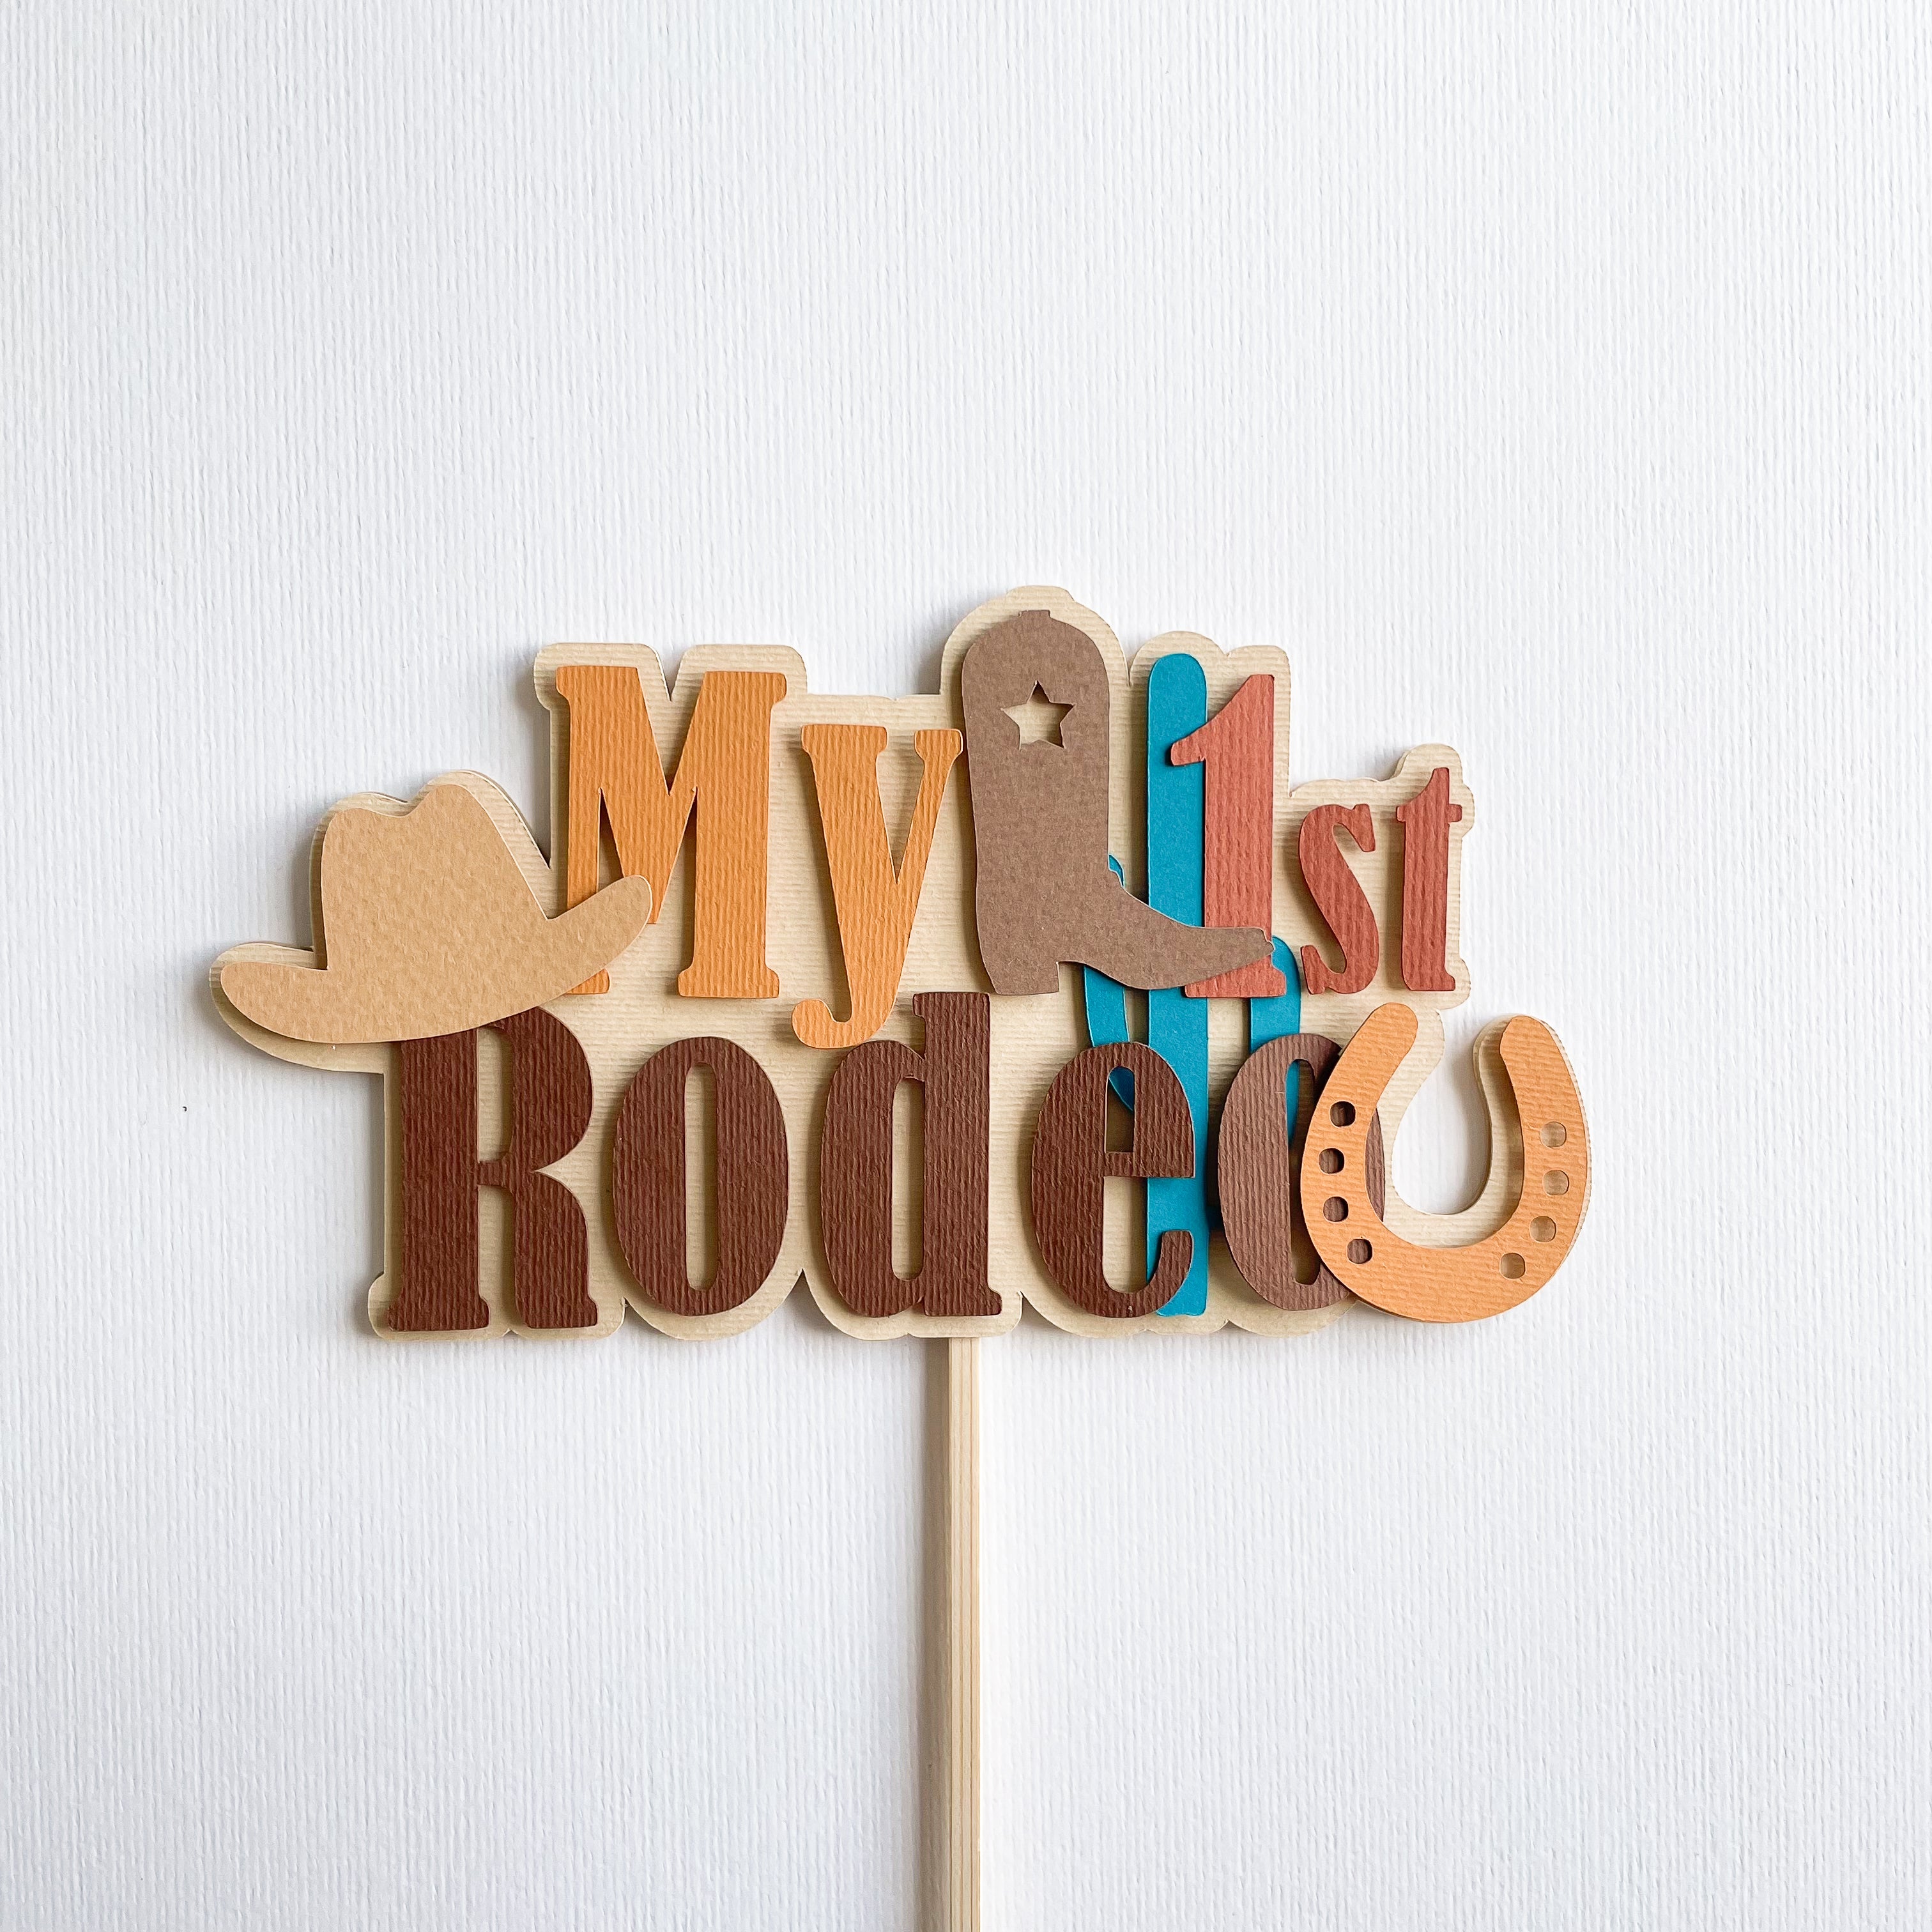 Cowboy Rodeo Cake Topper Cowboy Rodeo 1st Birthday  My First Rodeo Wild West Party Cowboy themed My 1st Rodeo Party